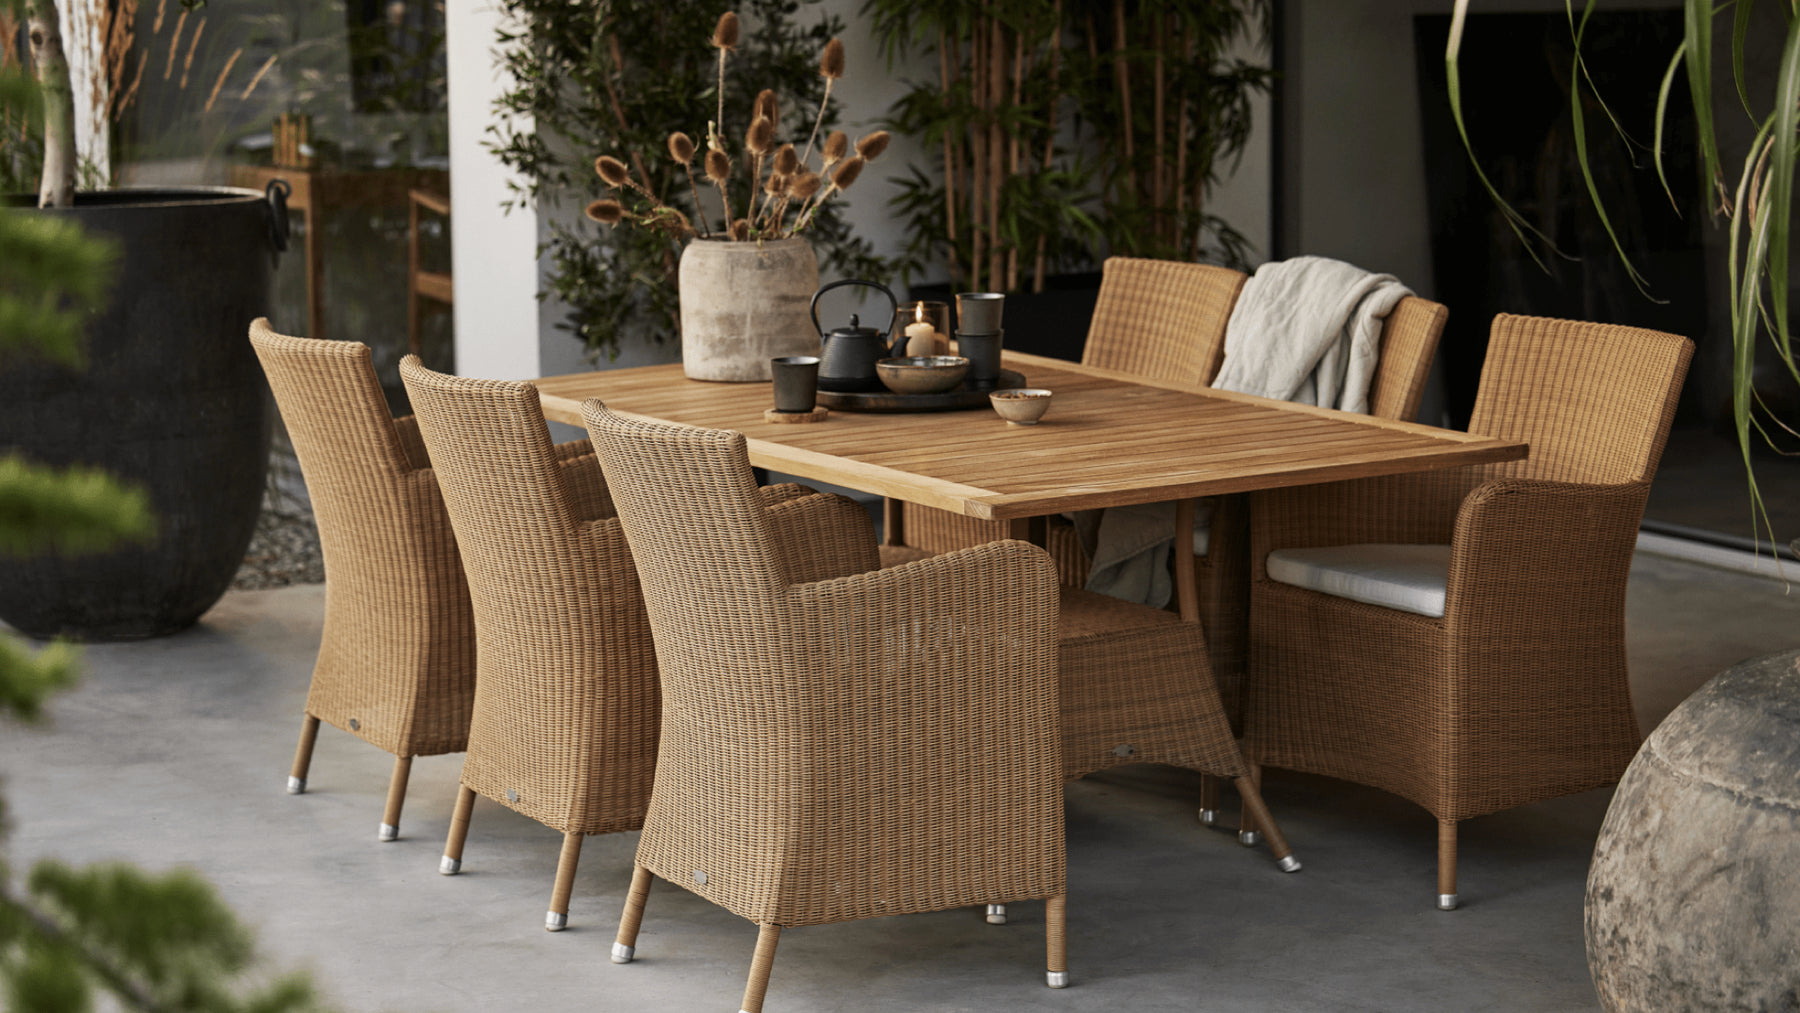 Boxhill's Hampsted Dining Chair and Lansing Dining Table make a cozy outdoor dining combination.